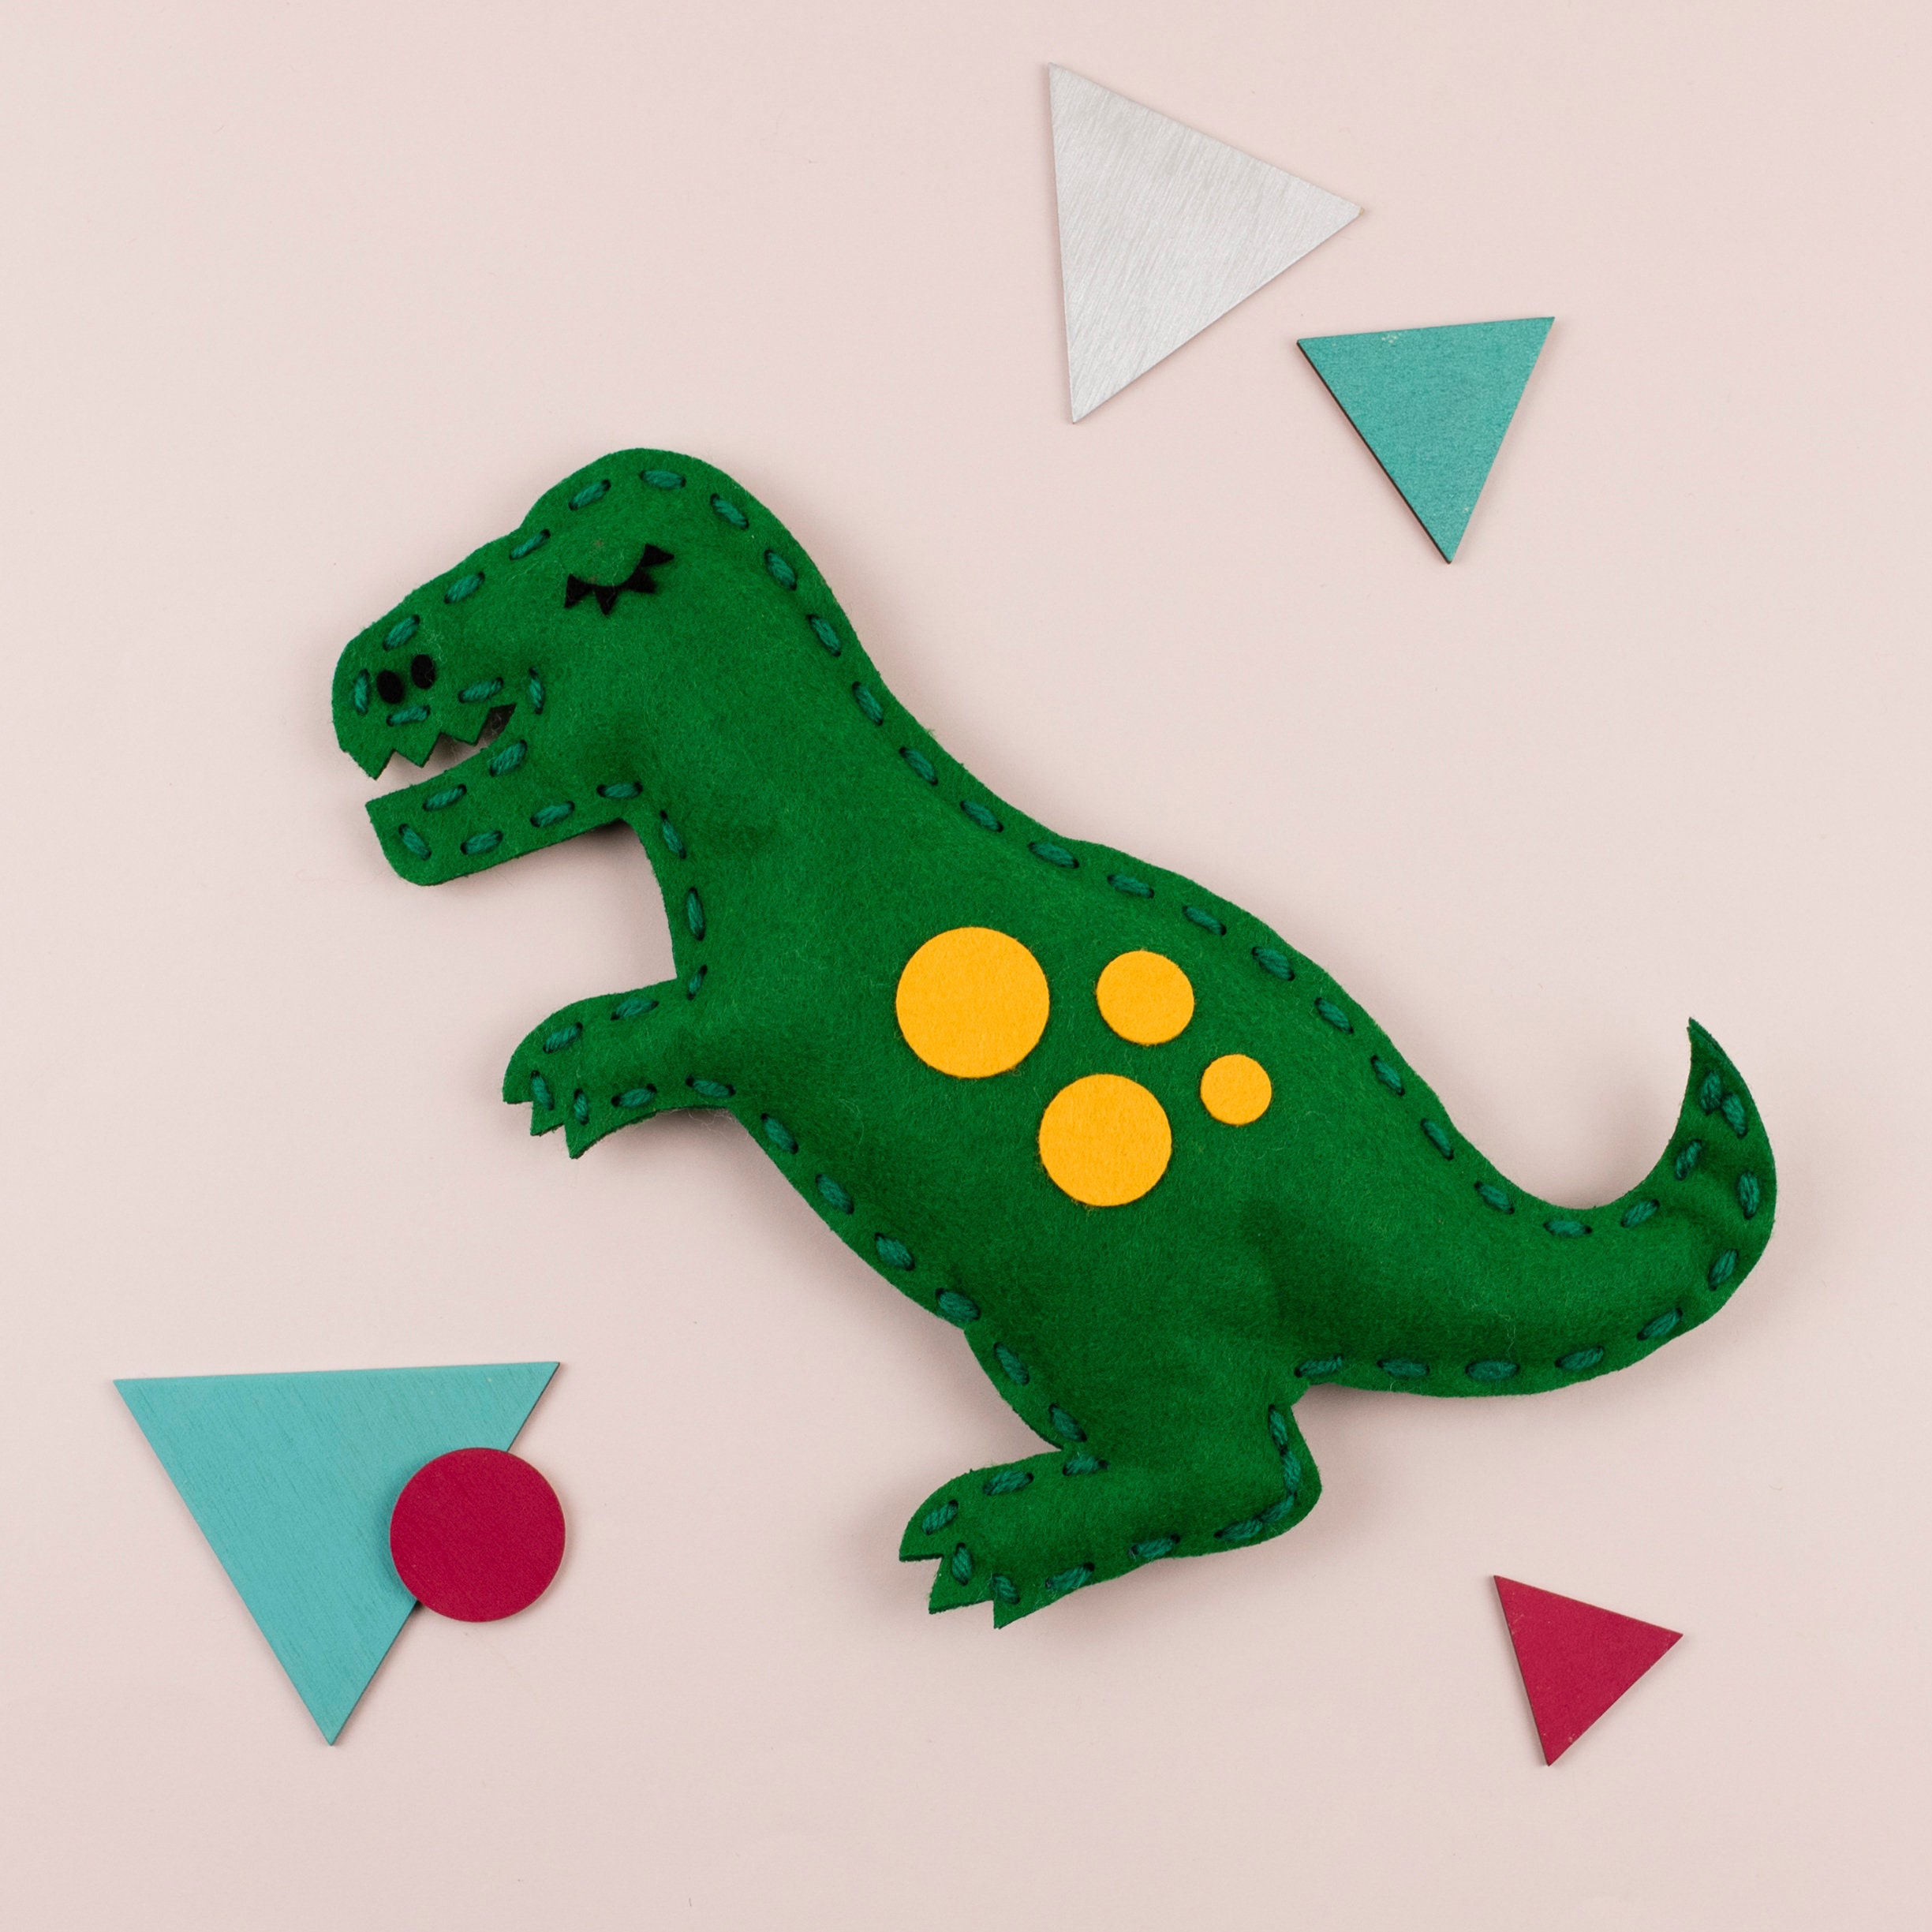  Sewing kit for Kids Beginners - DIY Craft for Girls & Boys -  Cut & Sew Fabric Panel Dinosaur (Dino Friends)